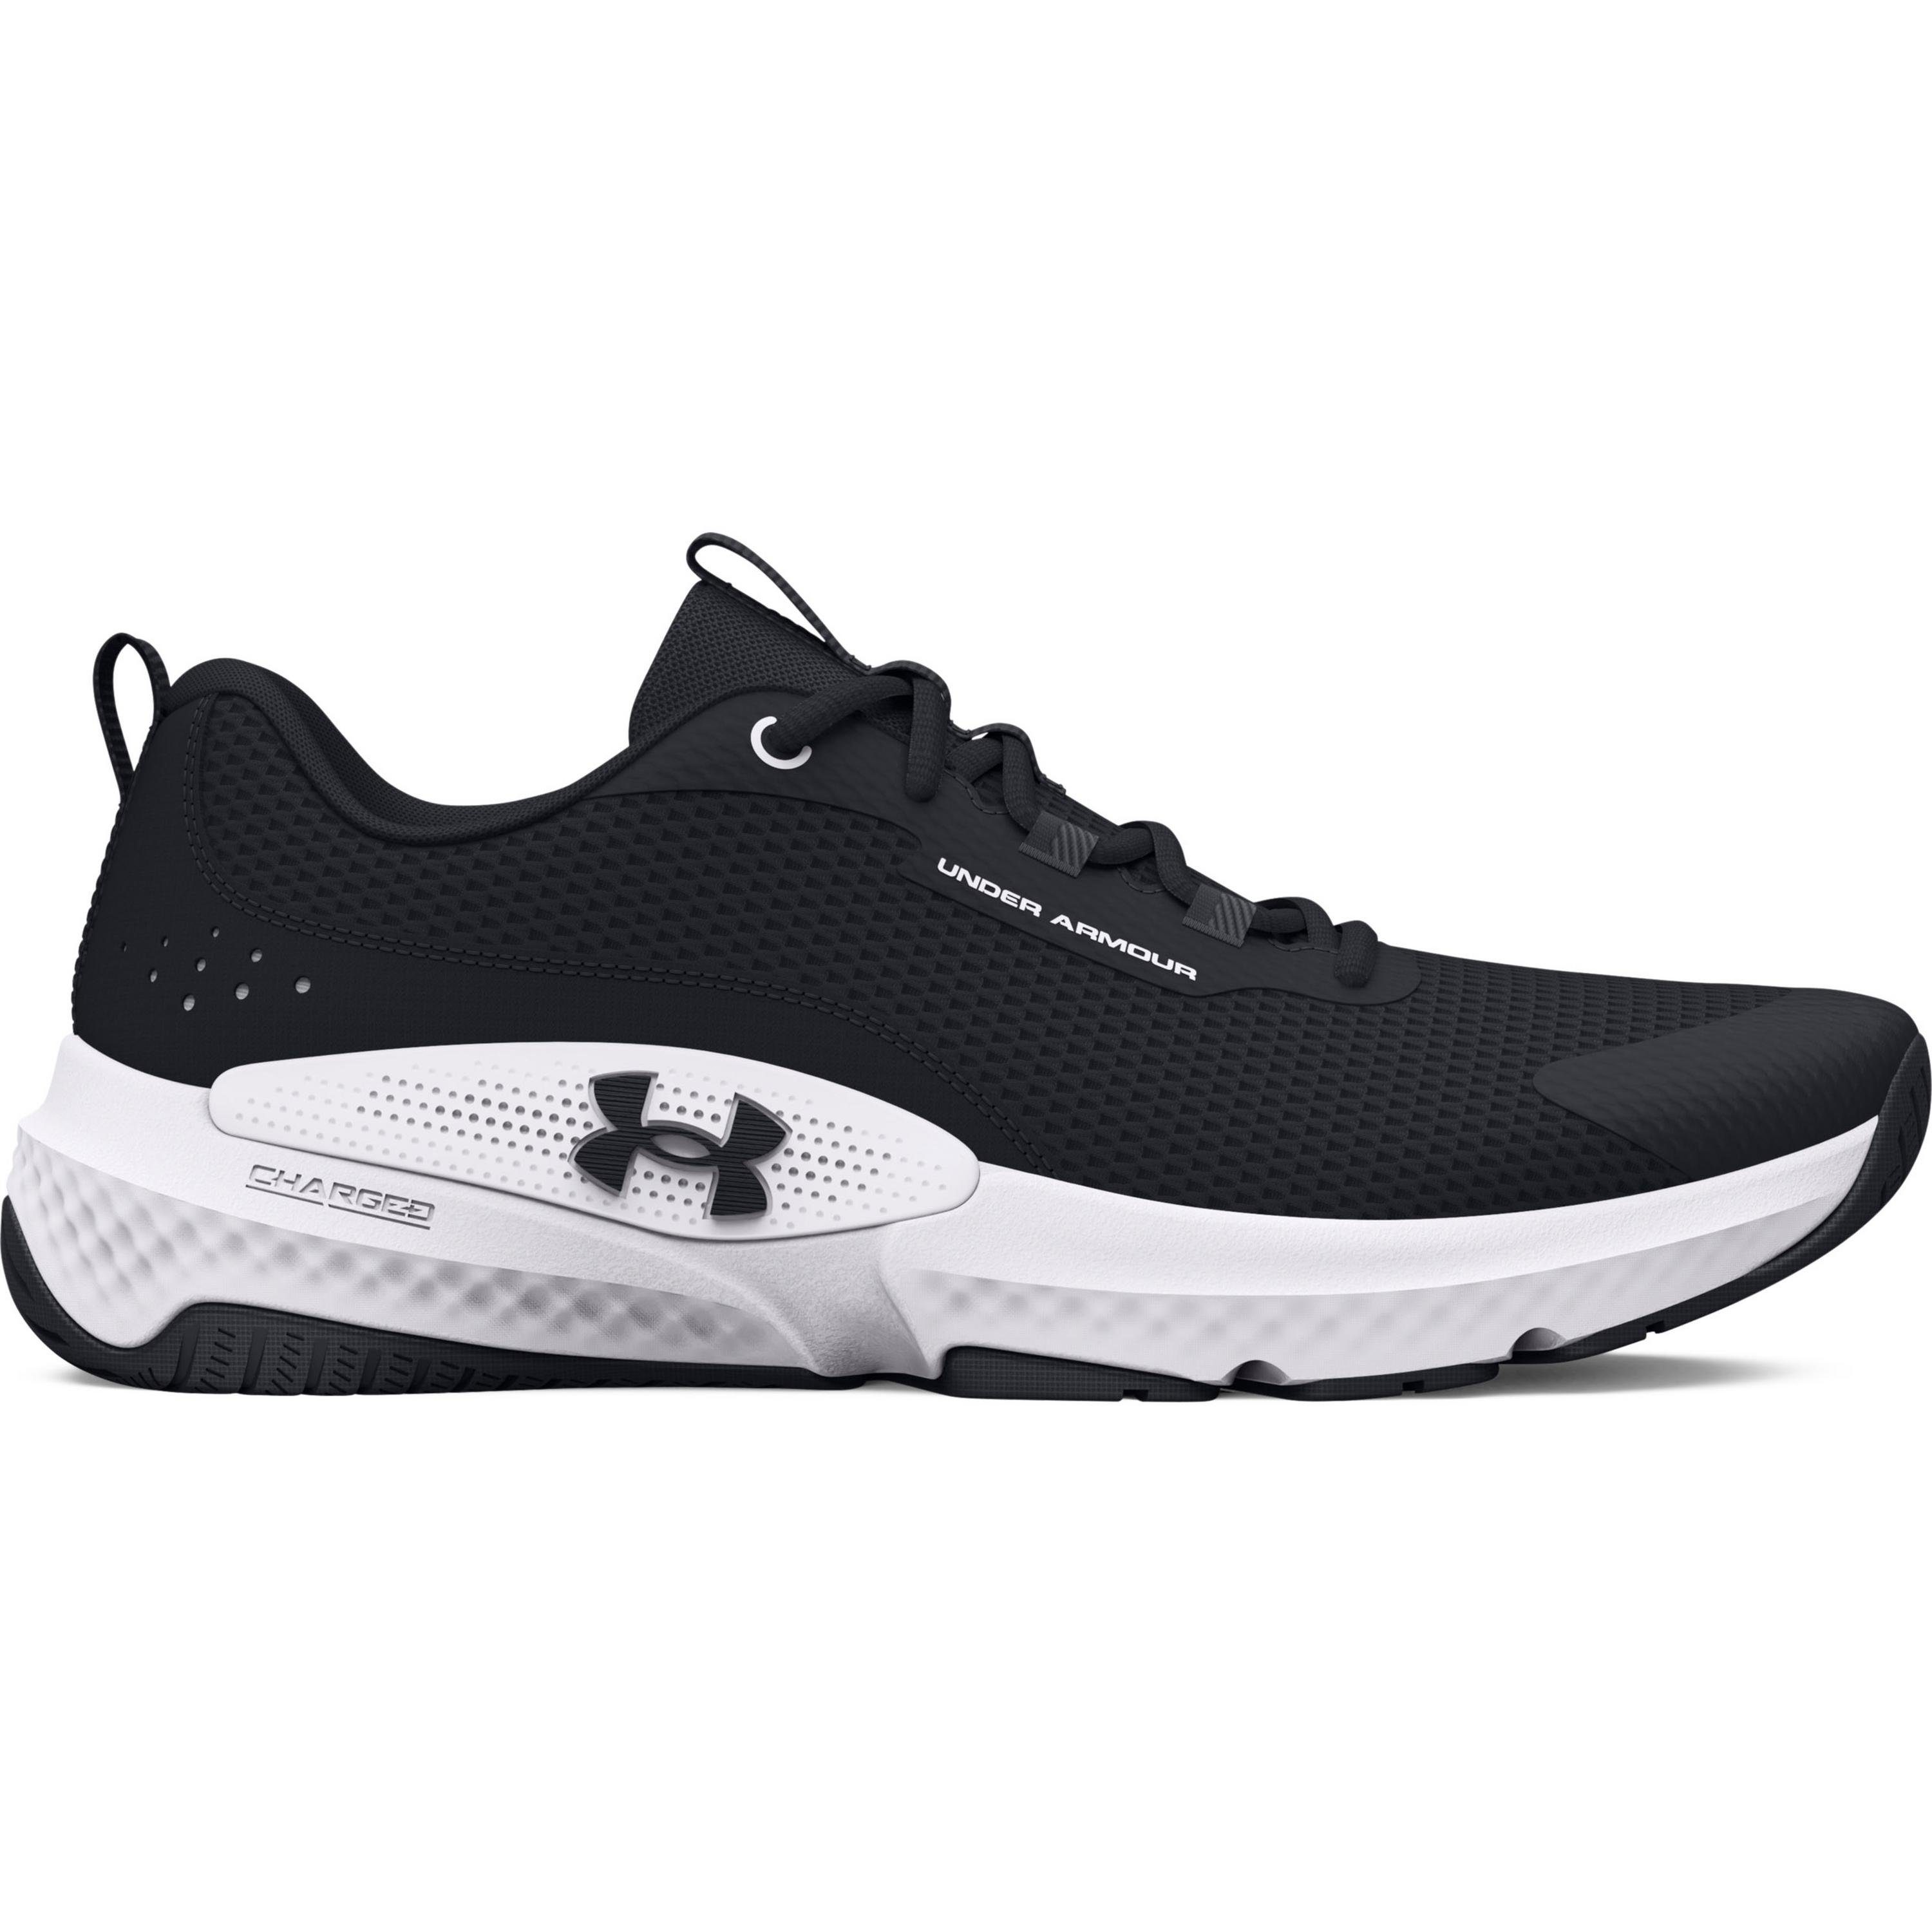 Dynamic black Select Armour® Under Fitnessschuh